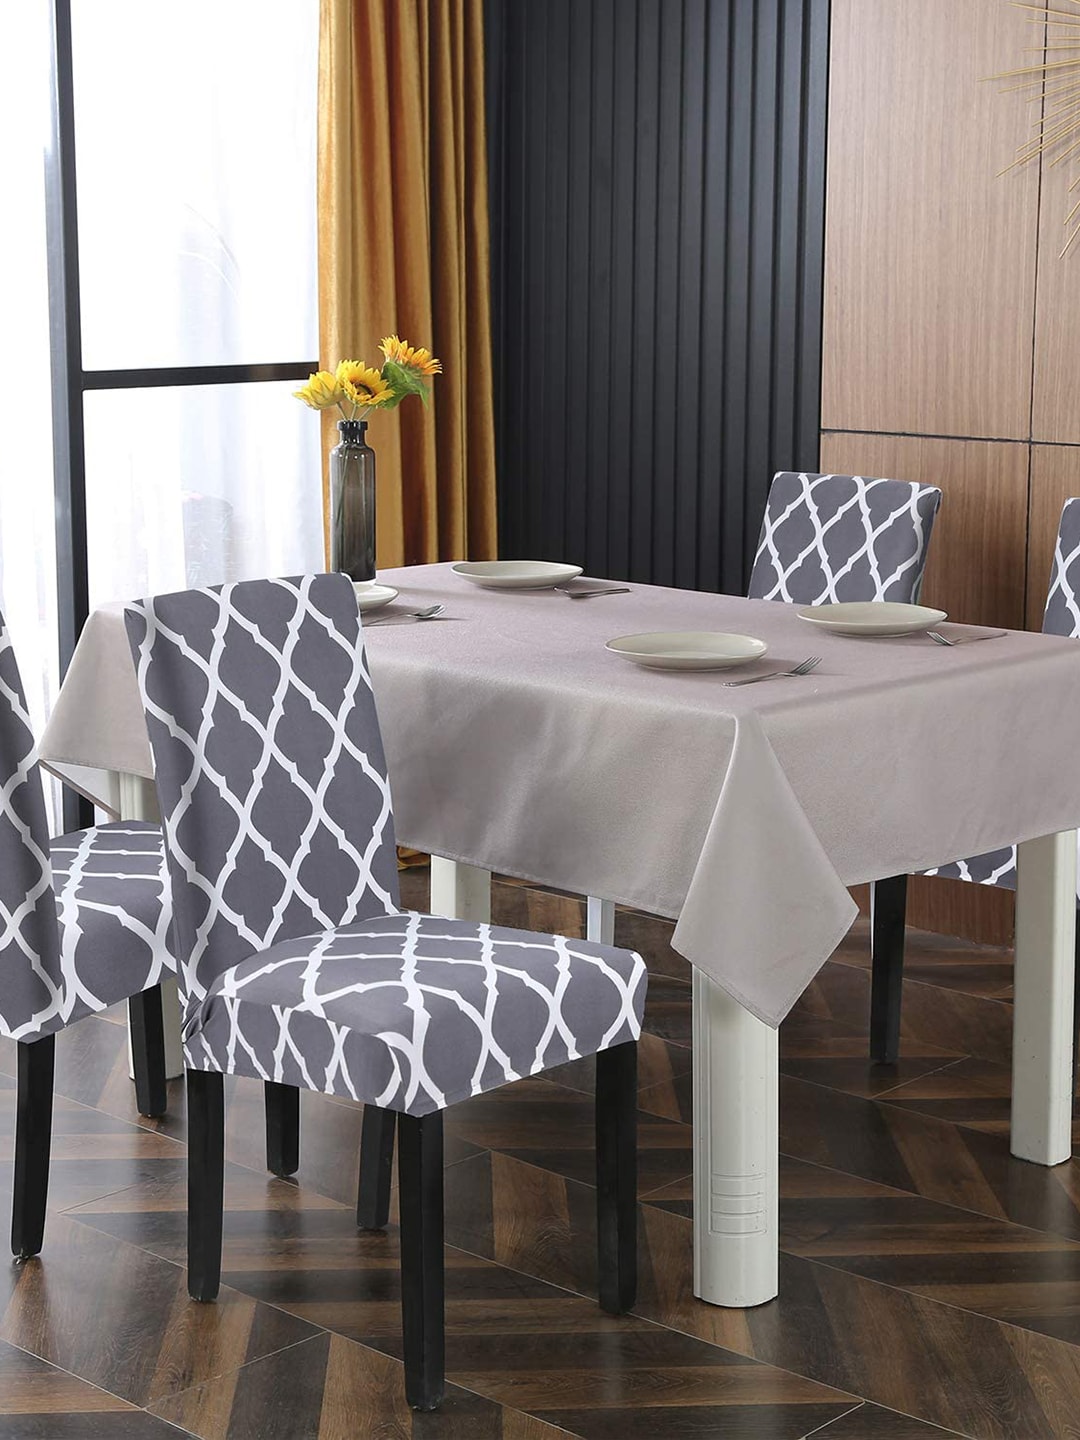 Styleys Set Of 6 Printed Stretchable Dining Chair Covers Price in India